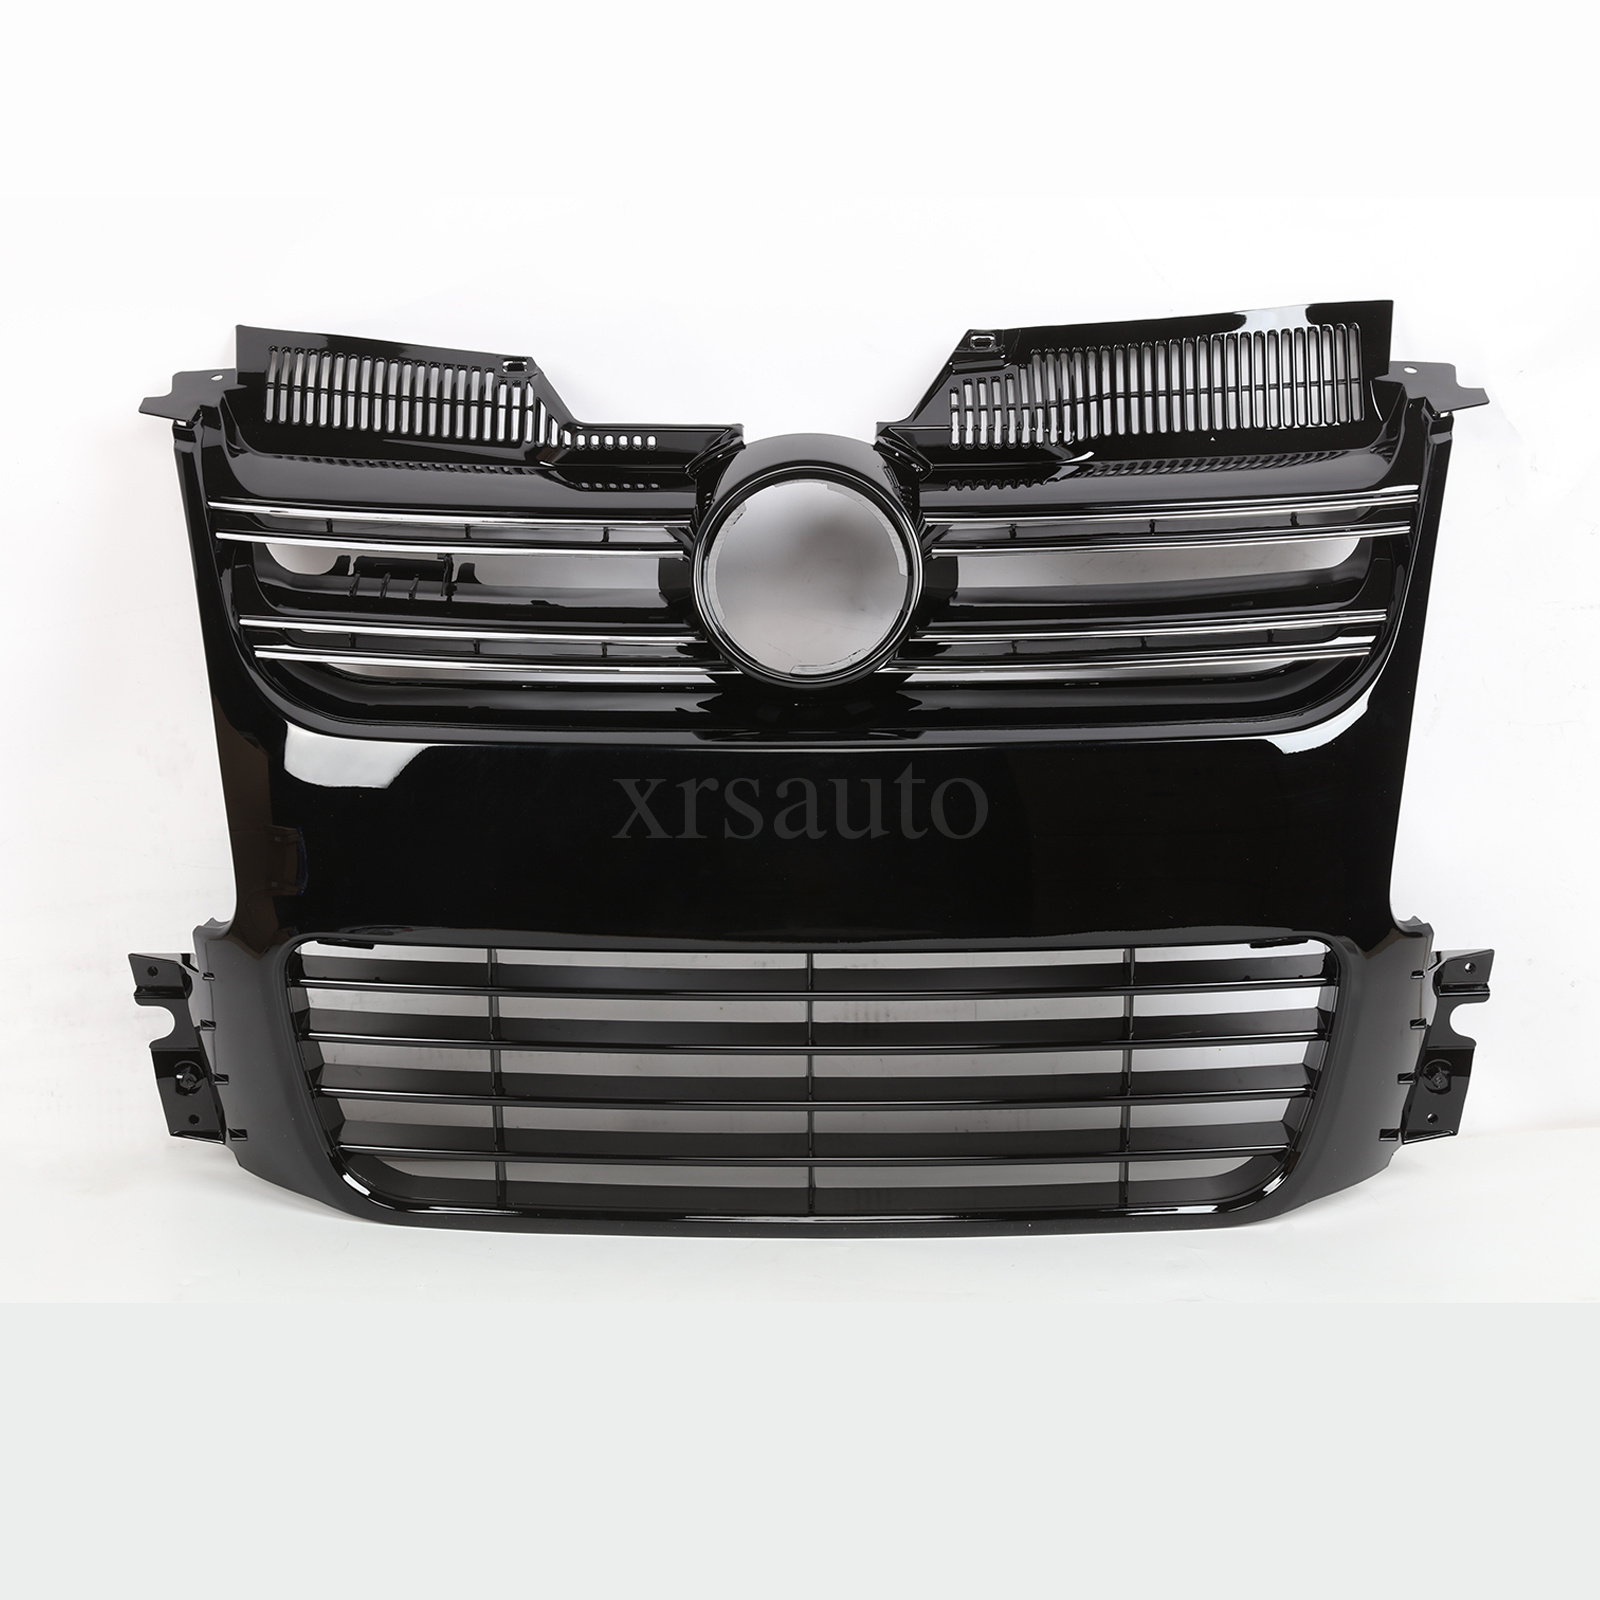 Golf VW Volkswagen 5 Grille W/ | For Style R Cover MK5 eBay Front Bumper 2003-2008